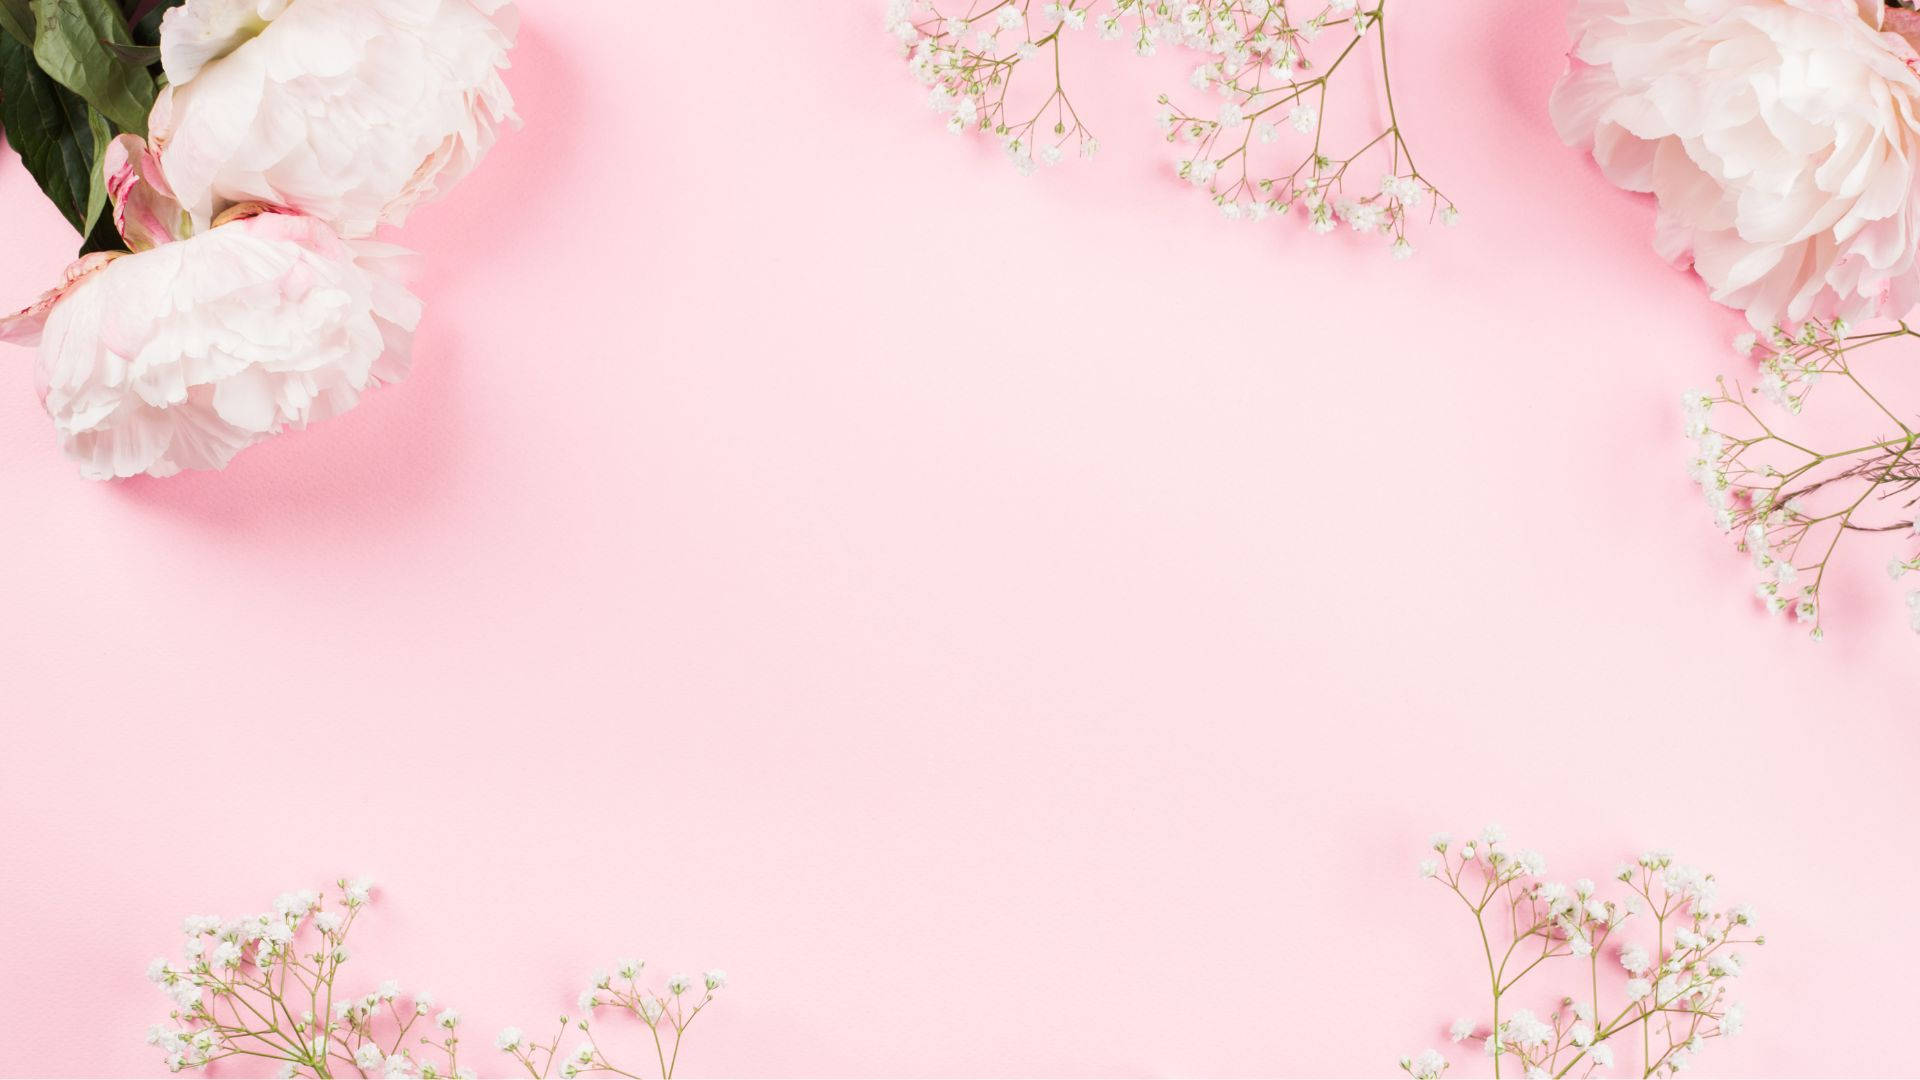 Delicate Floral Arrangement In Baby Pink Hues Background